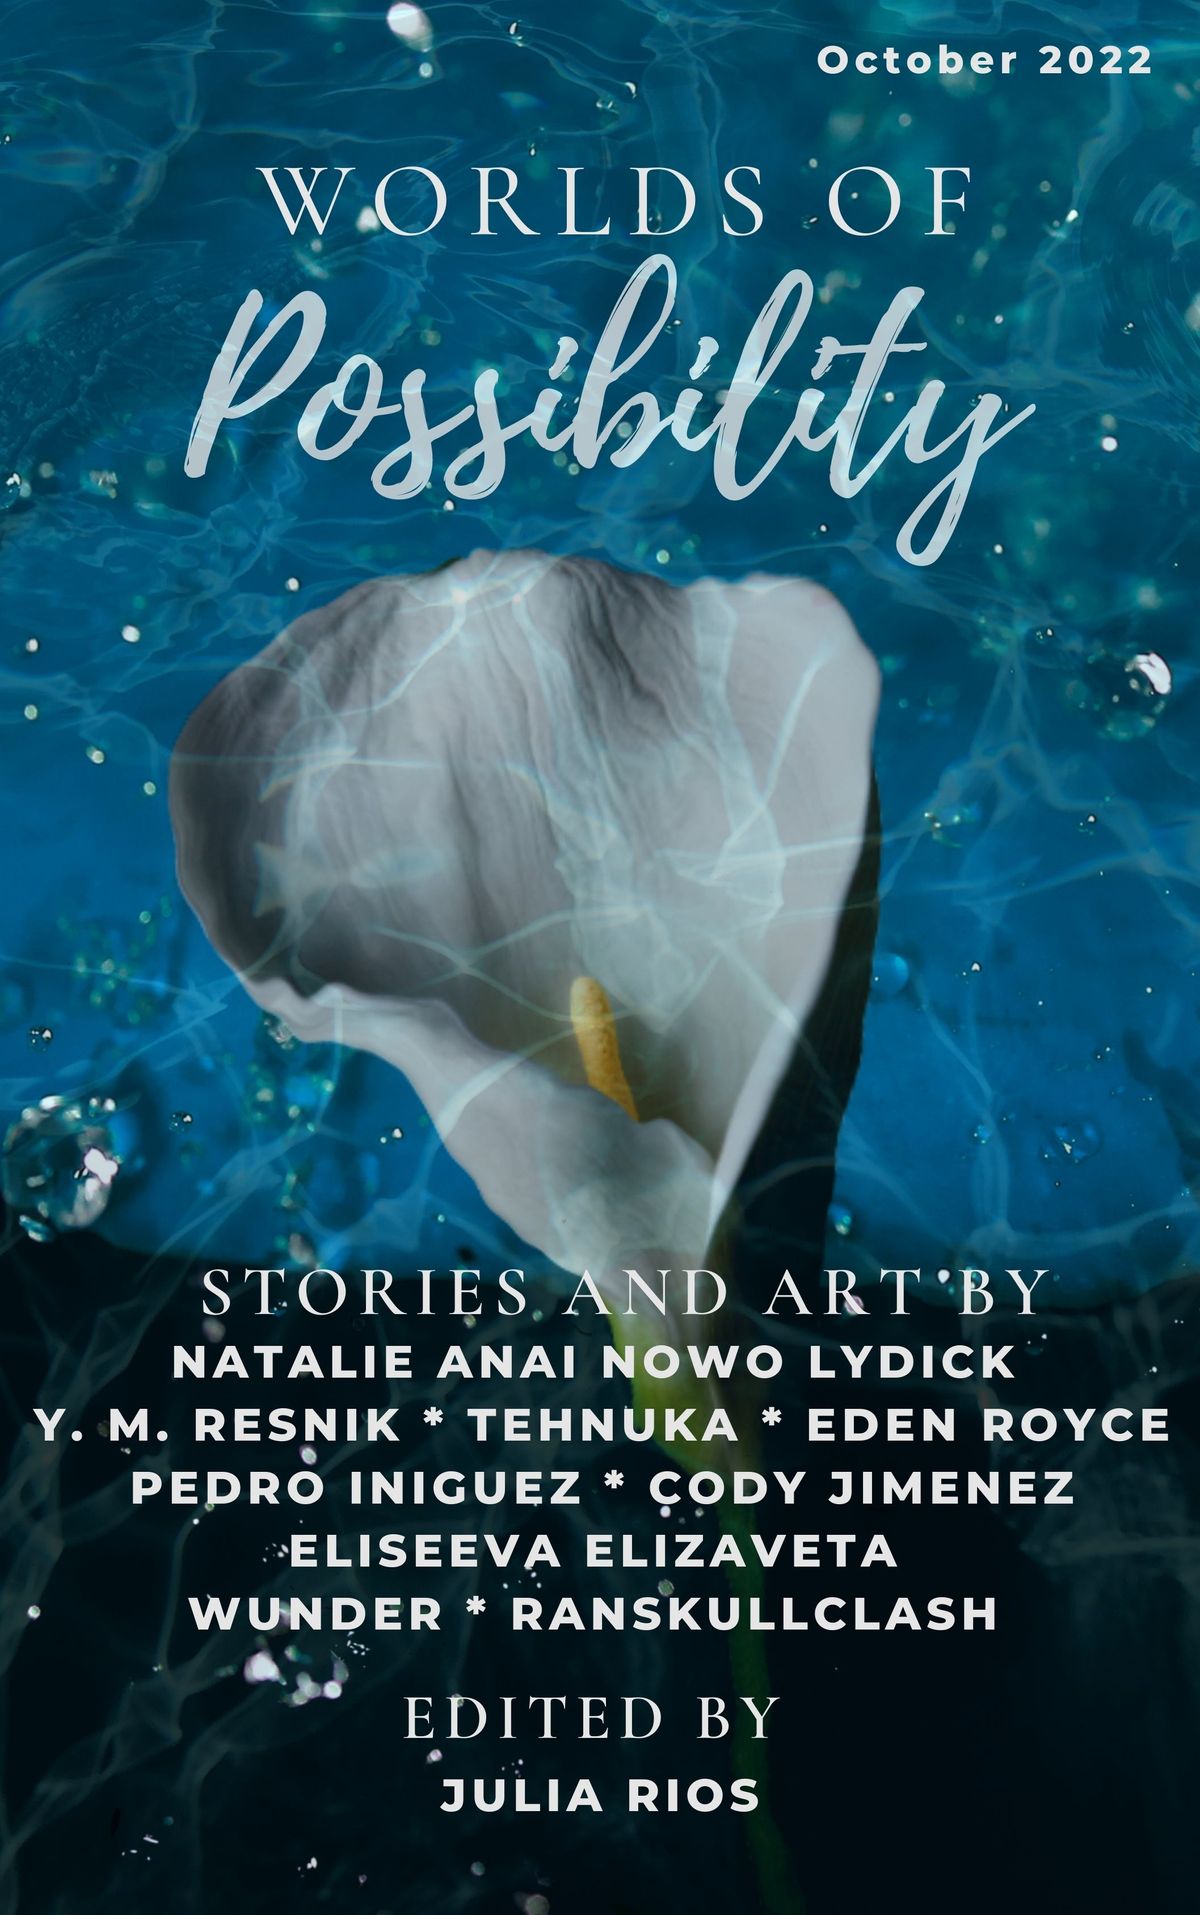 The October 2022 Issue of Worlds of Possibility